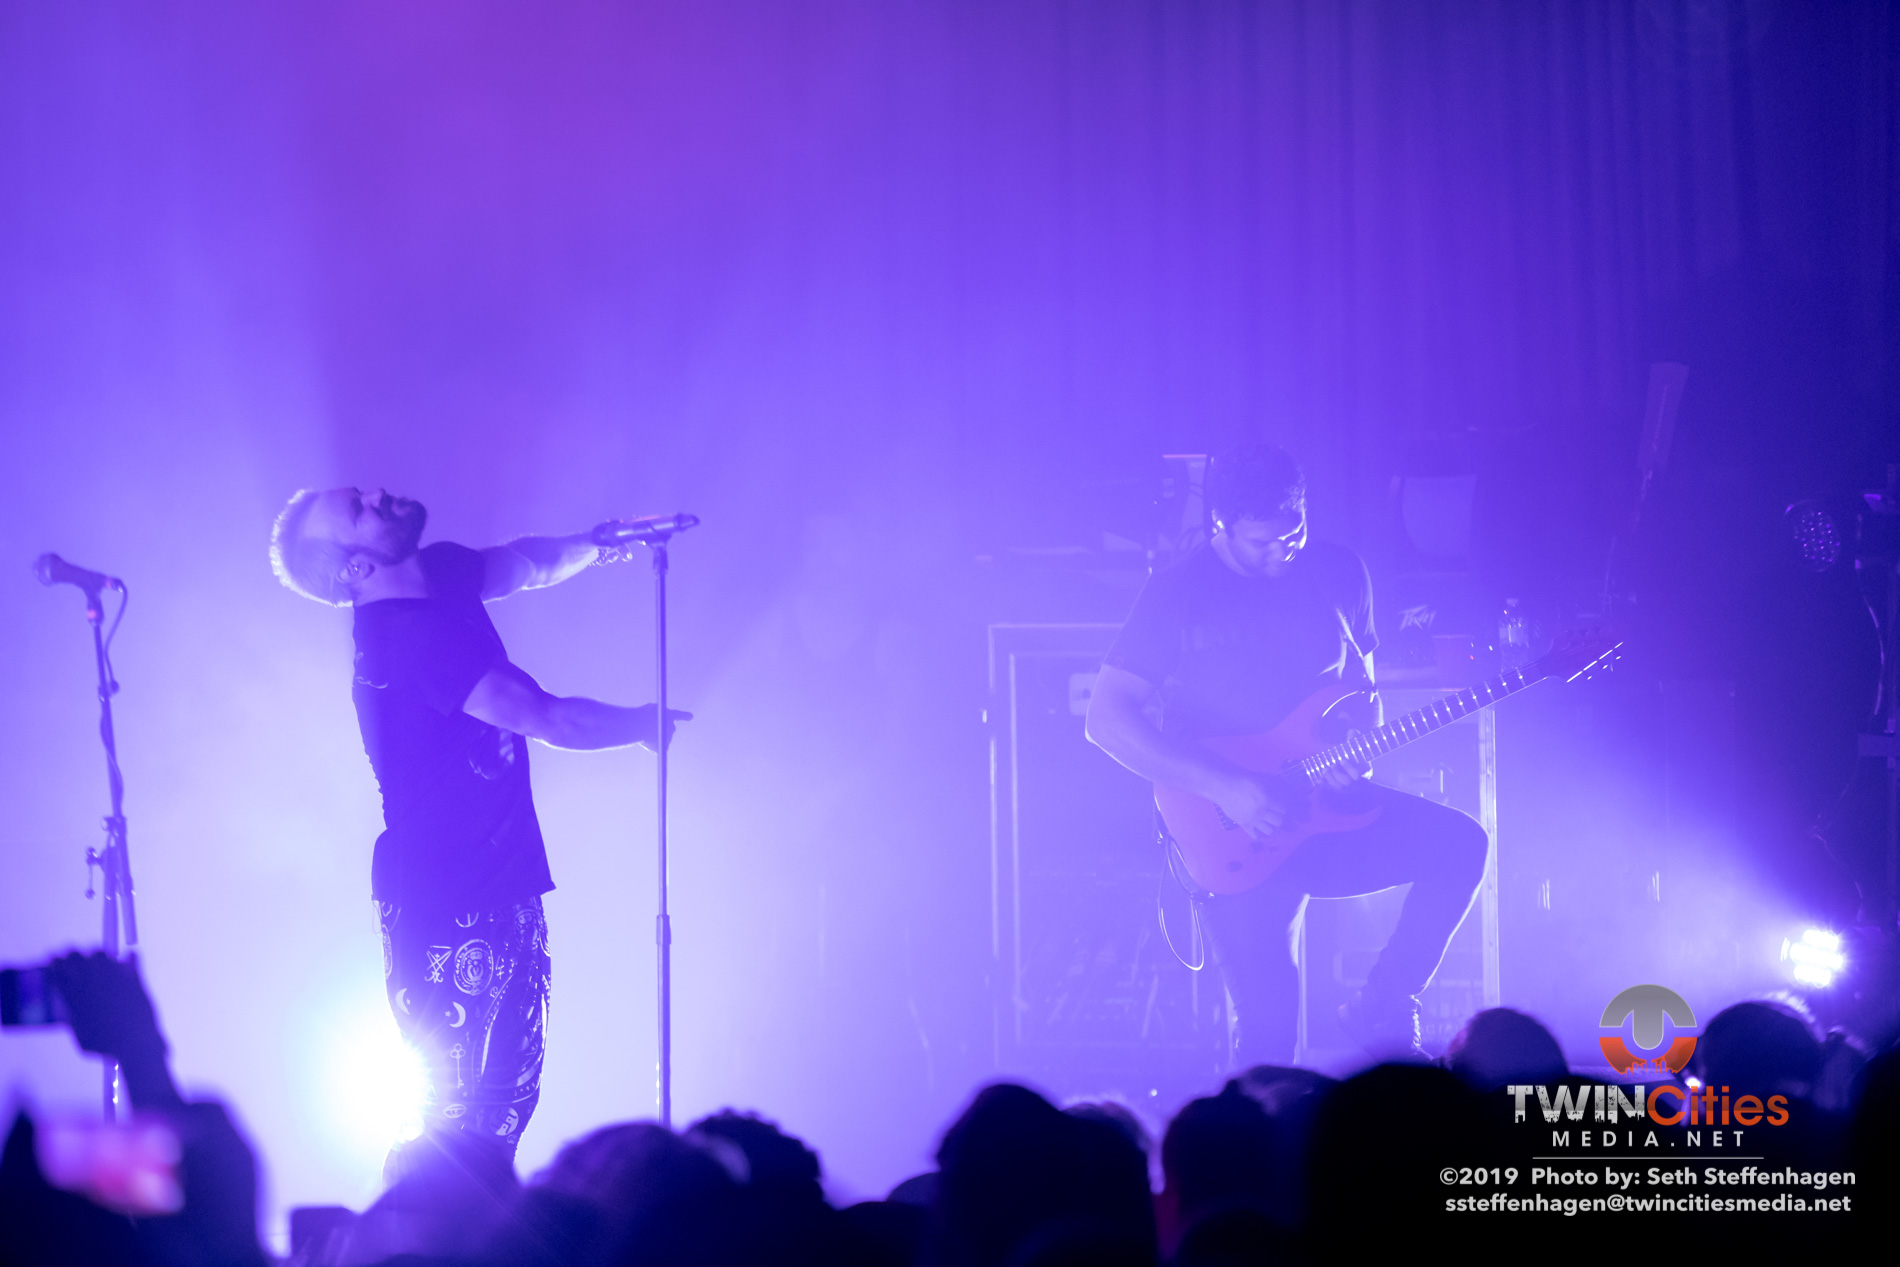 September 18, 2019 - Minneapolis, Minnesota, United States - Periphery live in concert at the Skyway Theatre along with Veil Of Maya and Covet as the openers.(Photo by Seth Steffenhagen/Steffenhagen Photography)